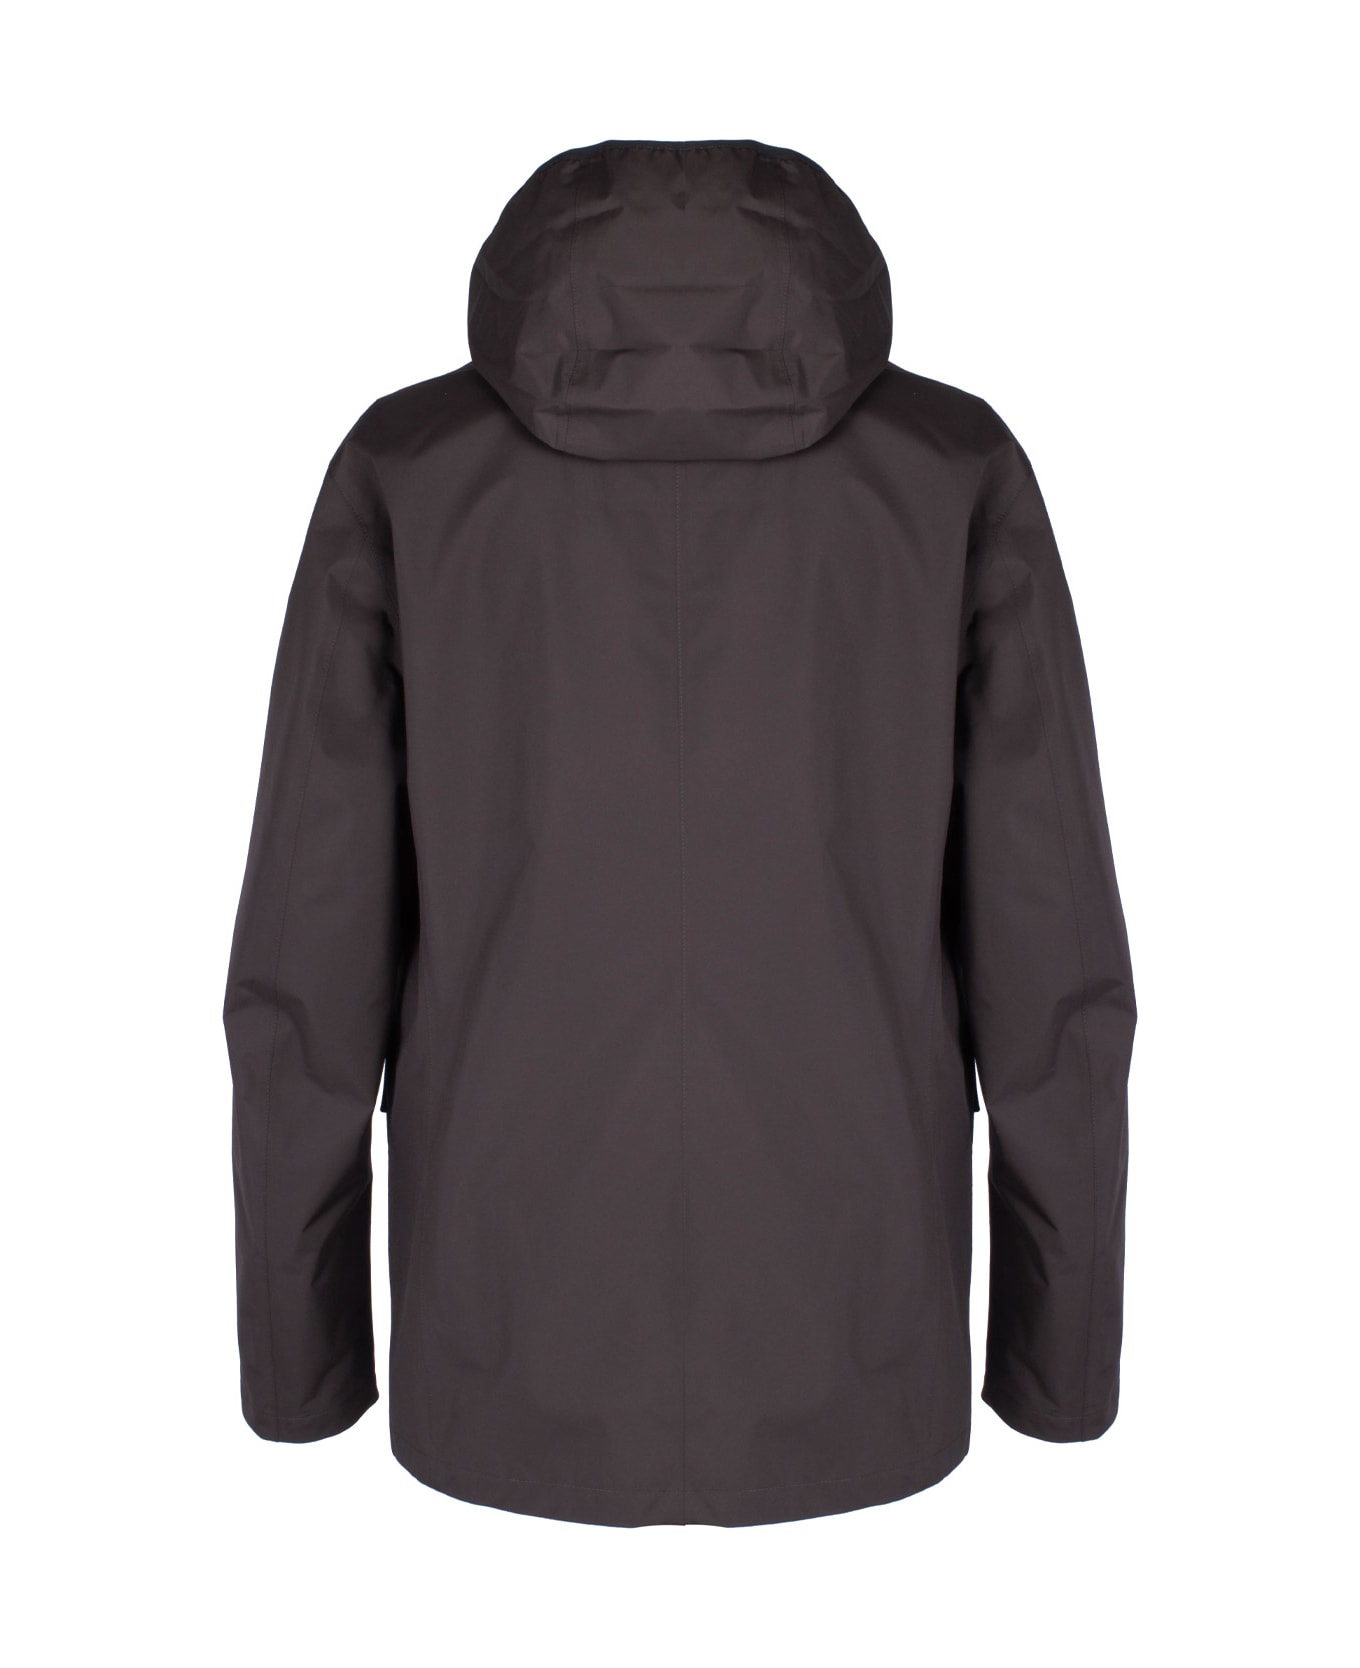 Herno Jacket With Removable Hood - Brown